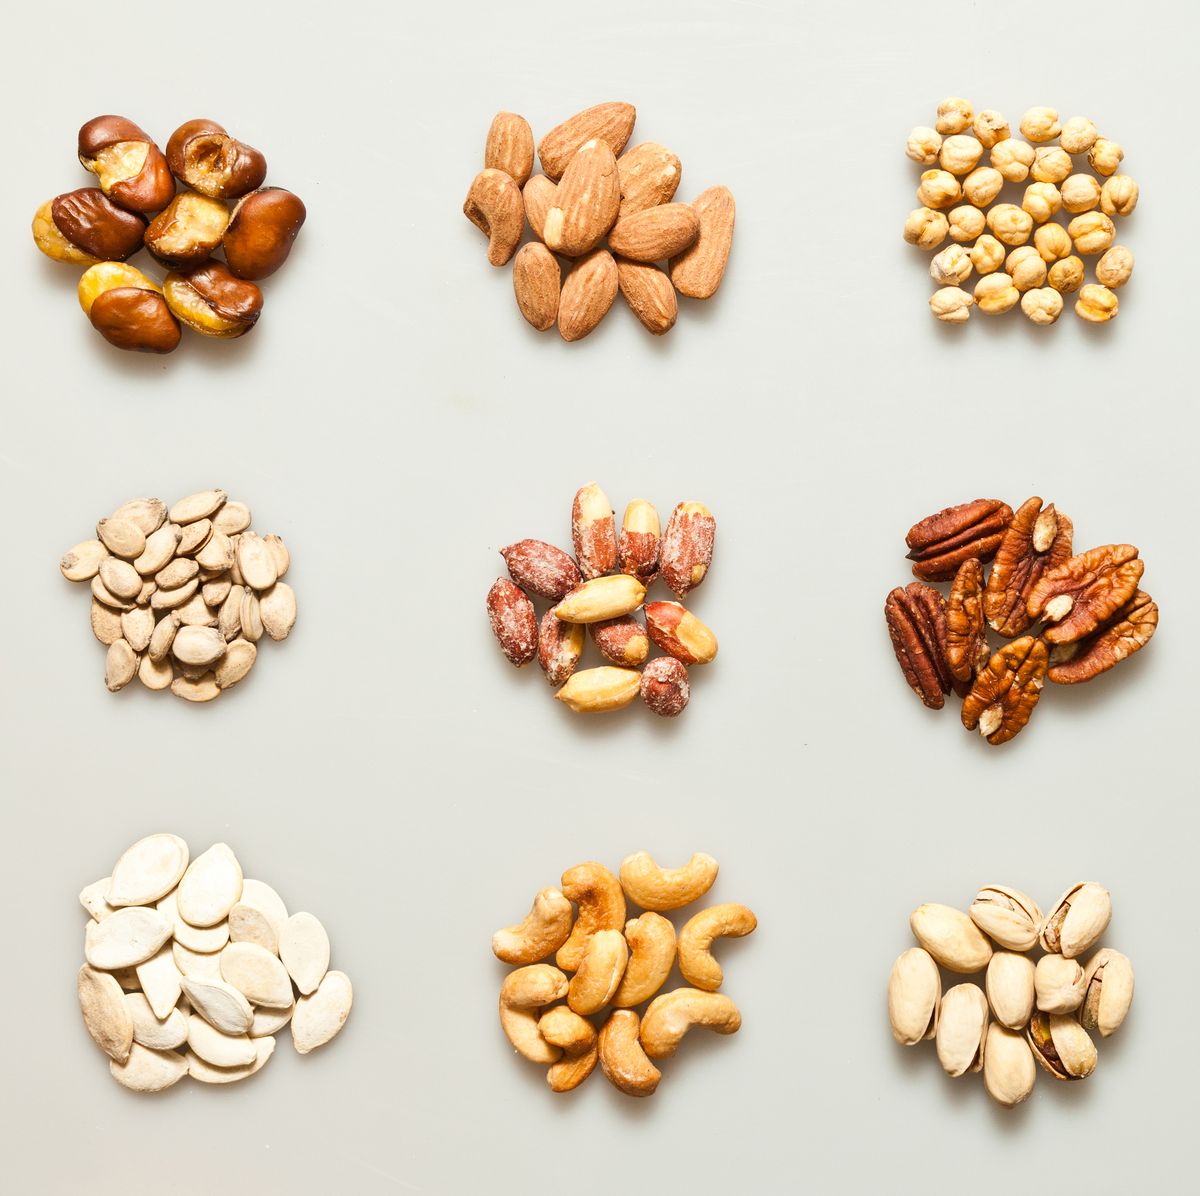 The 10 Healthiest Nuts To Eat, According to Nutritionists